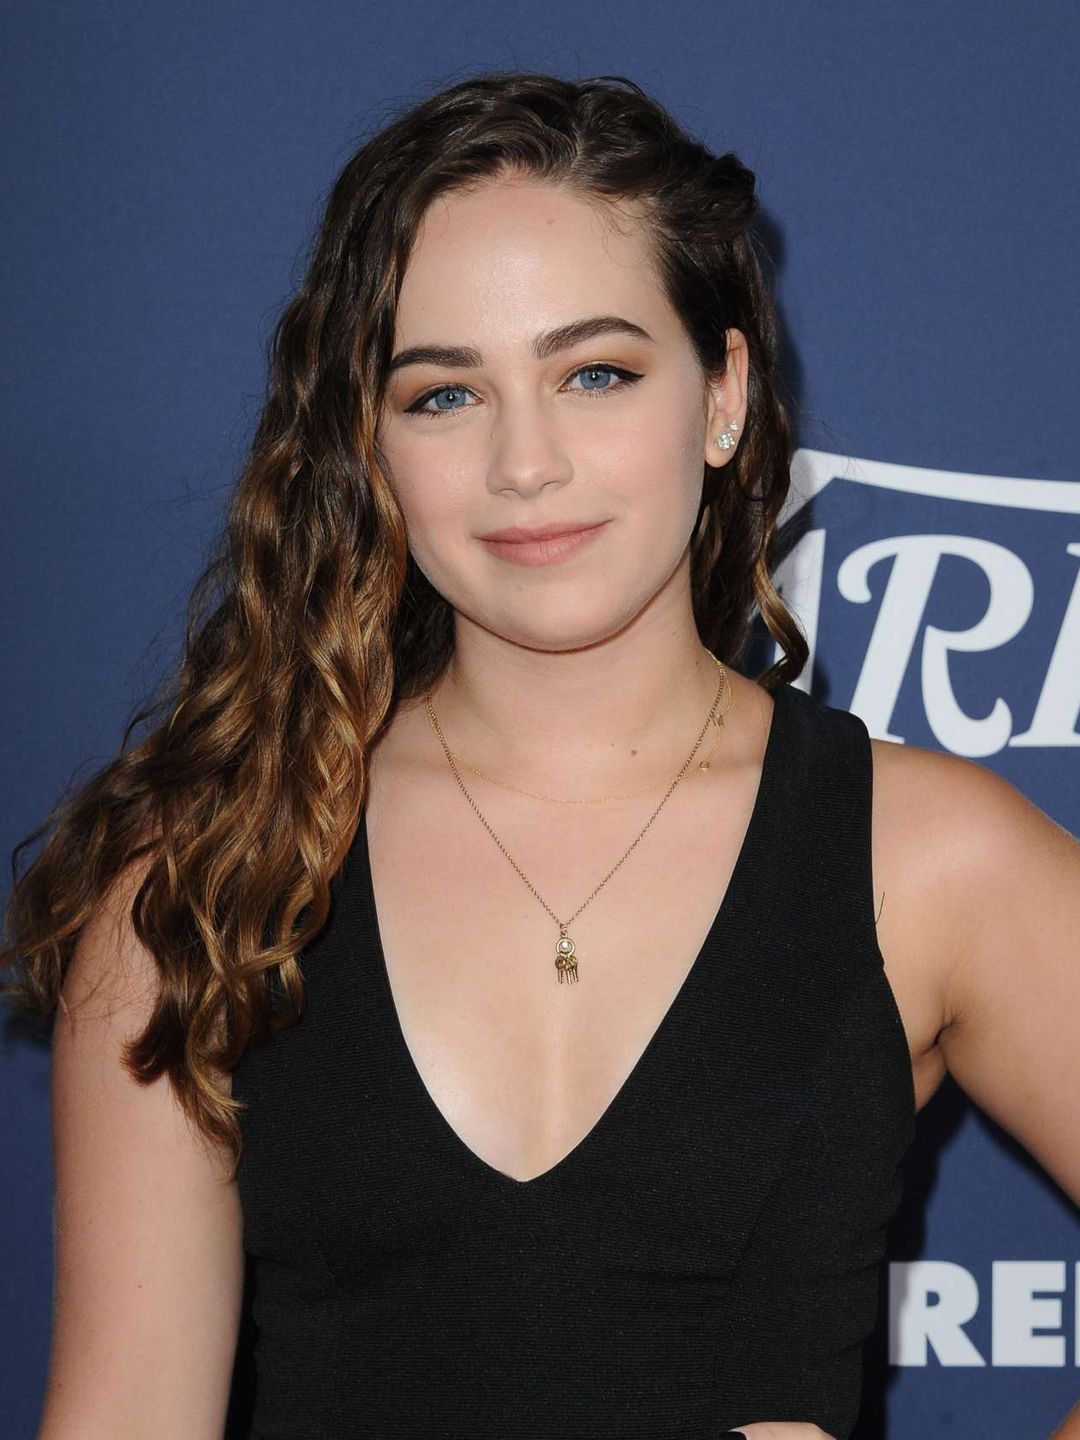 Mary Mouser young photos